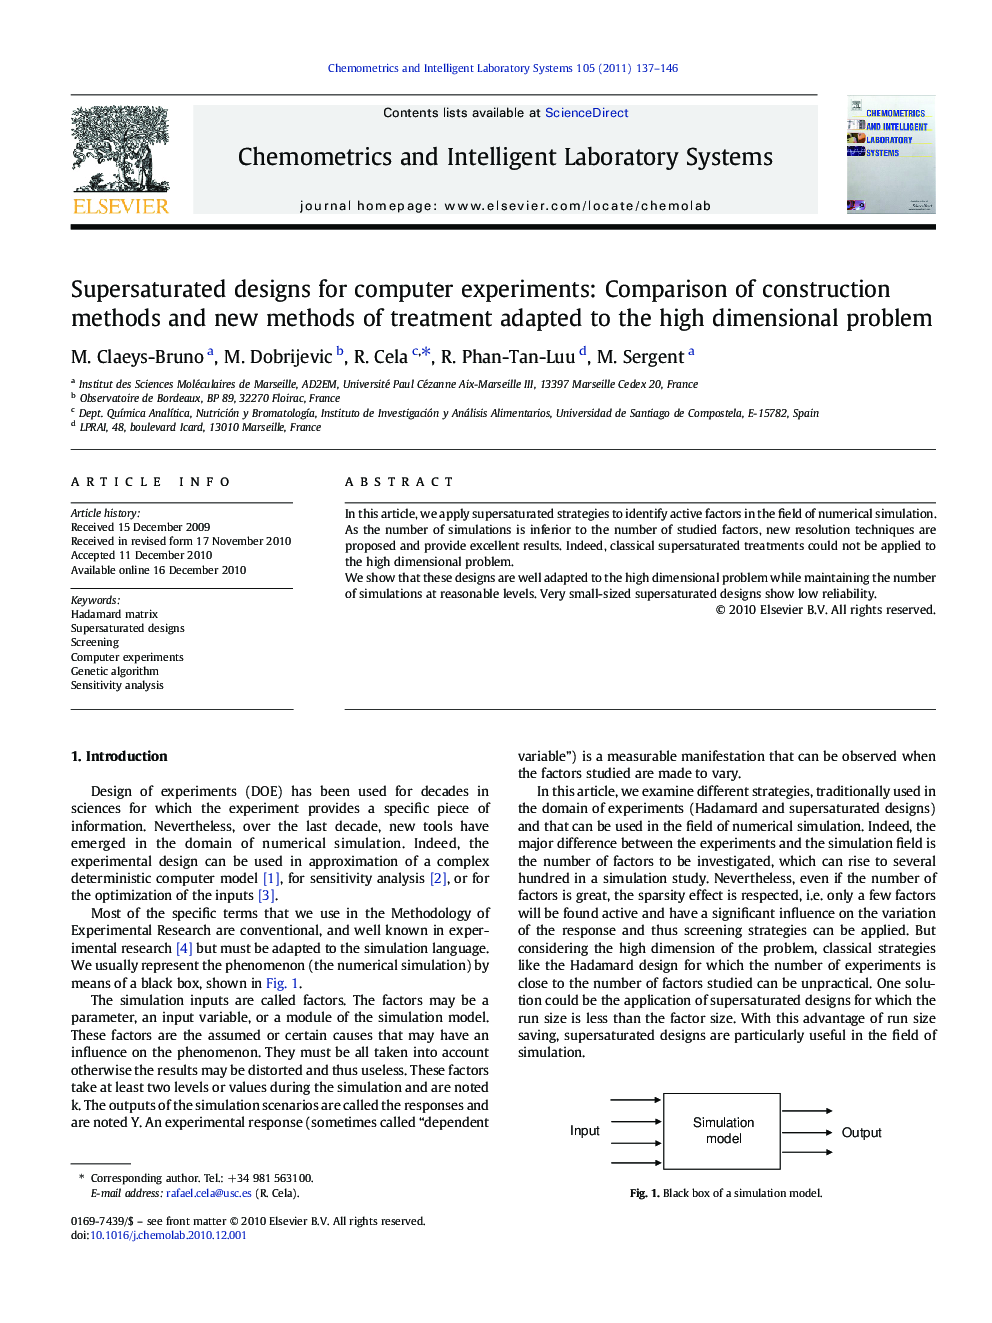 Supersaturated designs for computer experiments: Comparison of construction methods and new methods of treatment adapted to the high dimensional problem